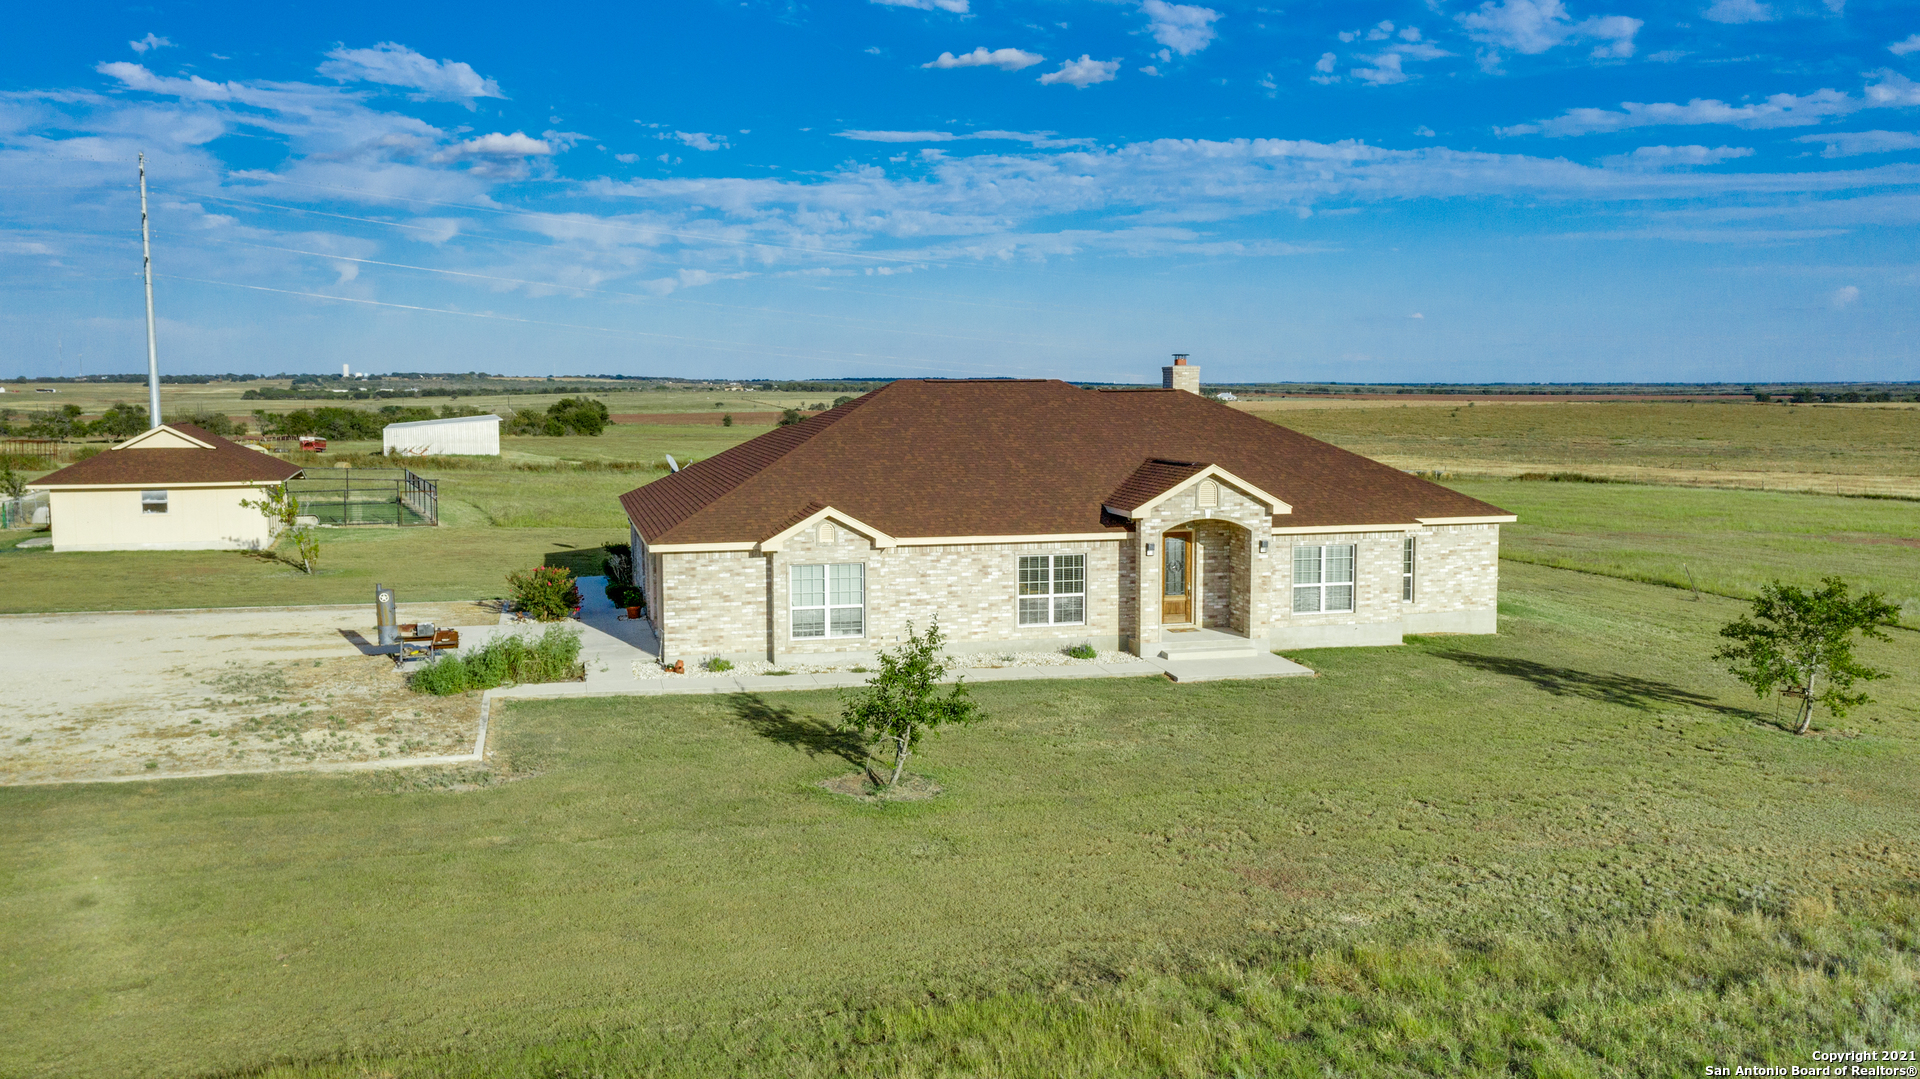 Popular Navarro ISD and your 3,000+ Sq. Ft. custom home on 32+ acres. Bonus mother-in-law home or income producing rental; 3/2 manufactured home.  As you enter the front door, you're greeted with open living/dining kitchen concept.  There are pleasing views with natural lighting through the many windows overlooking your own piece of Texas.  For the chefs, a gourmet kitchen with island, silestone countertops, a five burner gas/double oven plus large double door refrigerate/freezer.  Abundance  of custom cabinets with deluxe lighting.  Breakfast bar with pendant lighting.  Moving to the master suite, you will appreciate the spacious room with coffered ceiling and roomy dressing area with walk in shower and separate jetted garden tub.  Pride of ownership in every inch of this home.  Nothing has been overlooked.  Besides the attached 2 car garage, there's a 24x24 garage/workshop and an extra large kennel plus a 4,500 Sq. Ft. Barn with stalls for the FFA animals. Relax and enjoy the beautiful sunset from your back patio.  This is a great home for executive entertaining and family gatherings.  Sellers will also consider selling the 3,000 Sq. Ft. home along with 15 acres; $994,400.